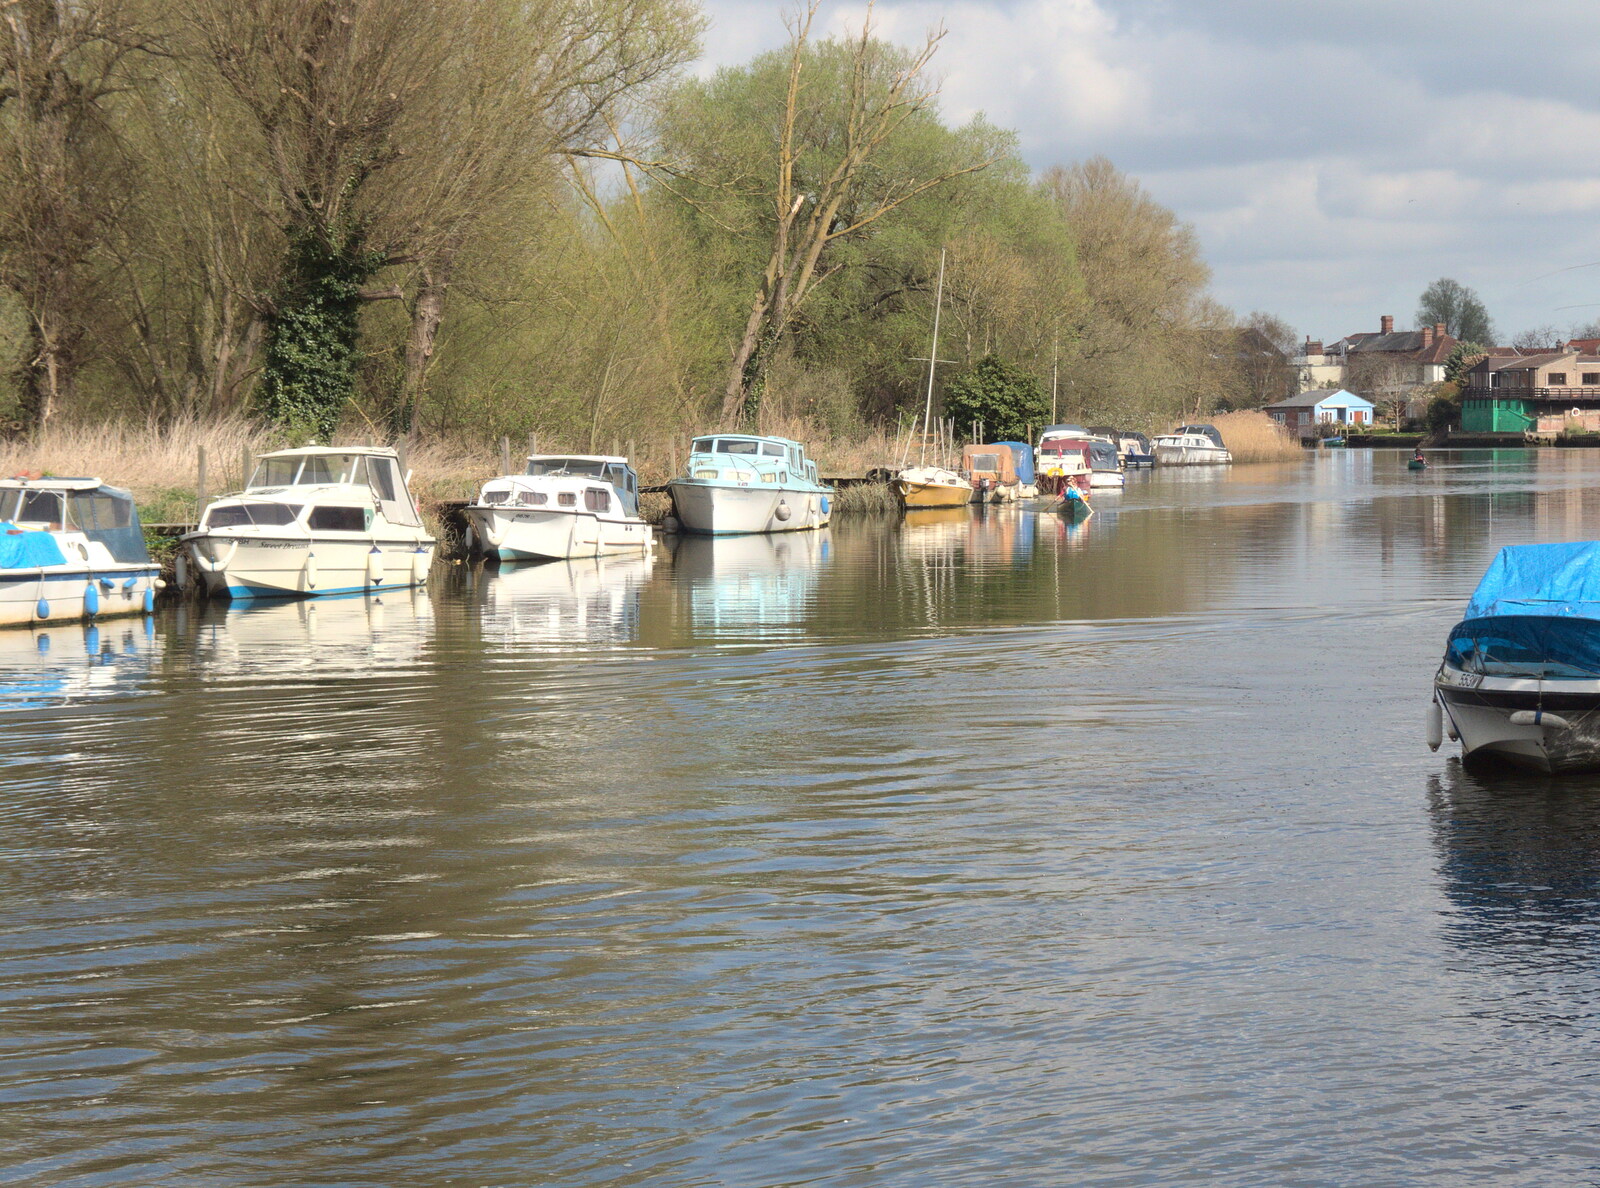 Boats on the river from A Postcard from Beccles, Suffolk - 2nd April 2017